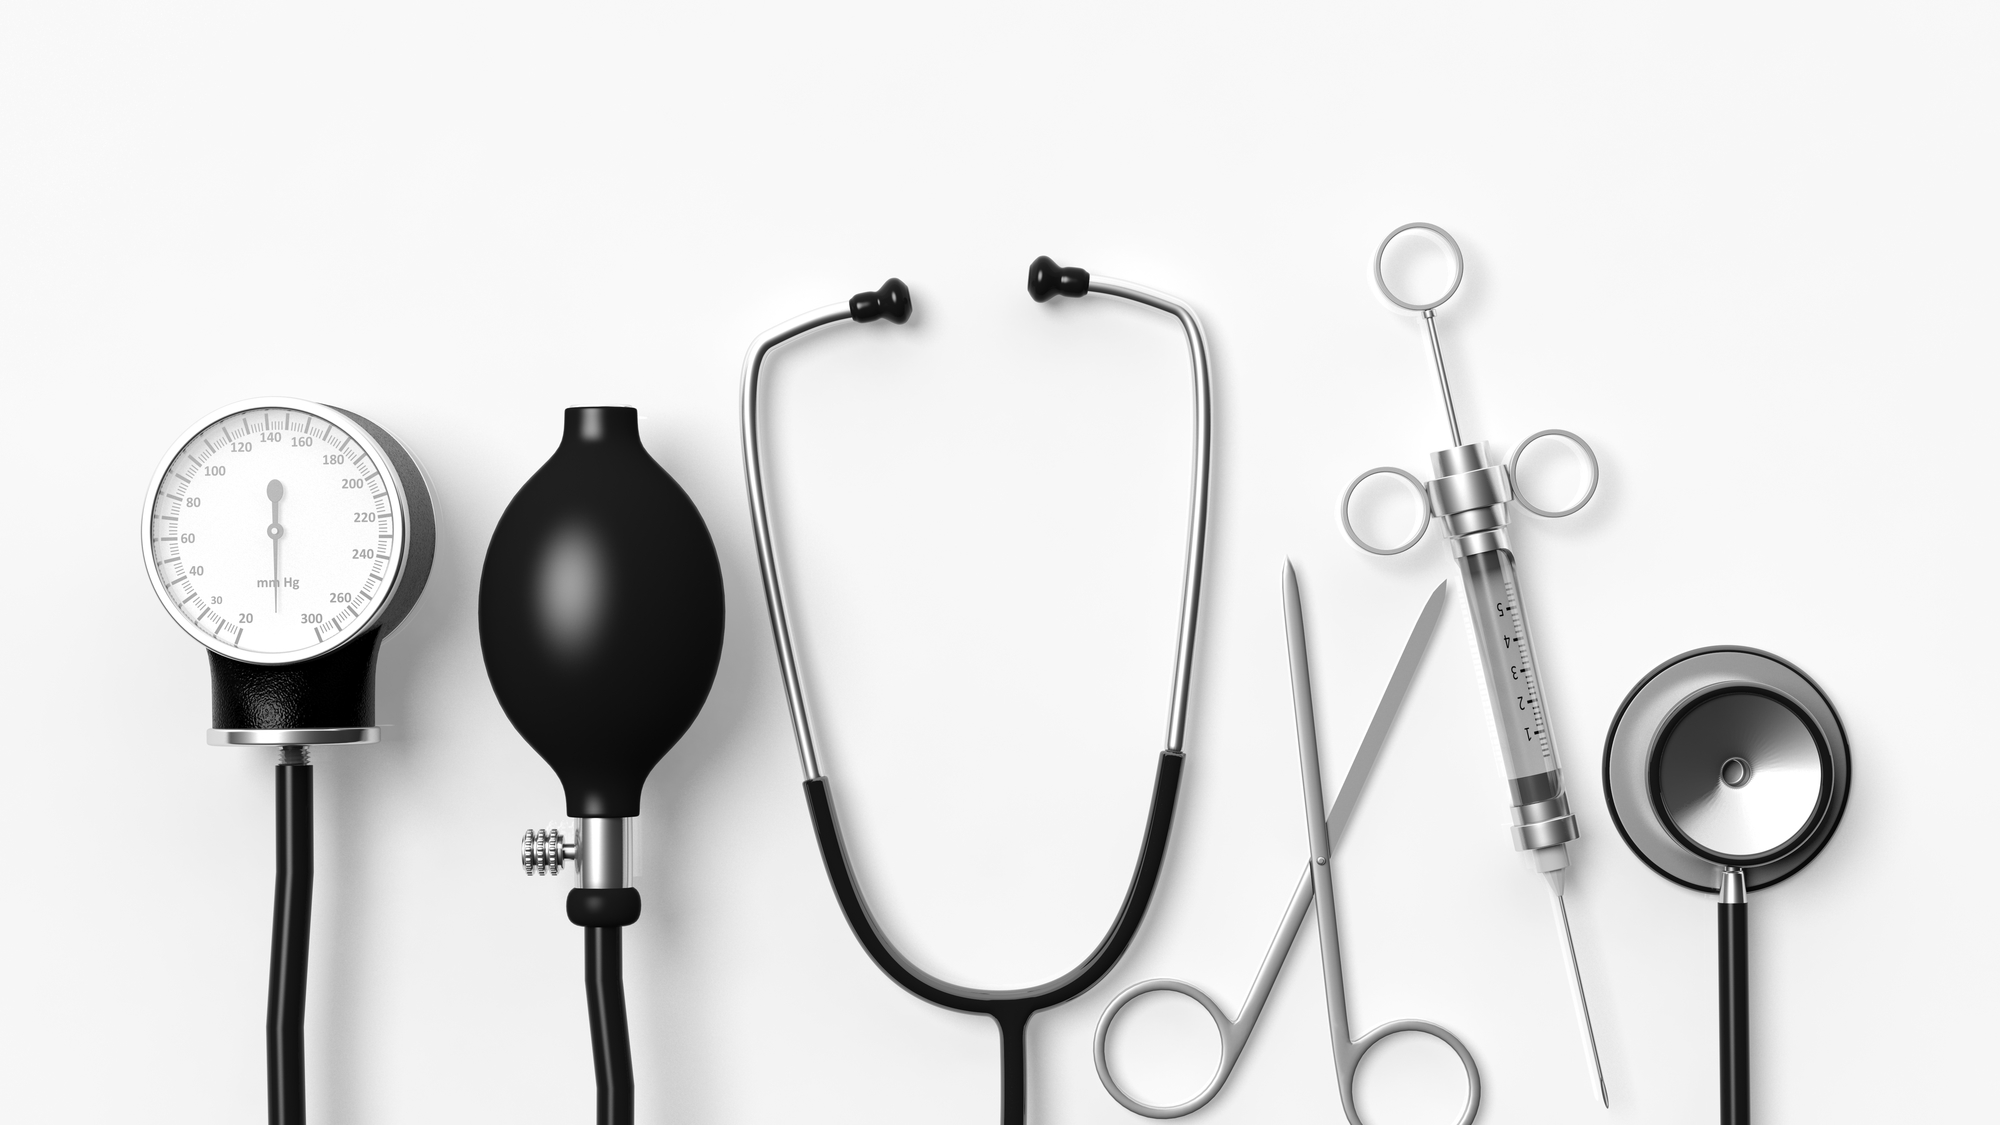 Medical Supplies and Equipment Needed to Start A Medical Practice